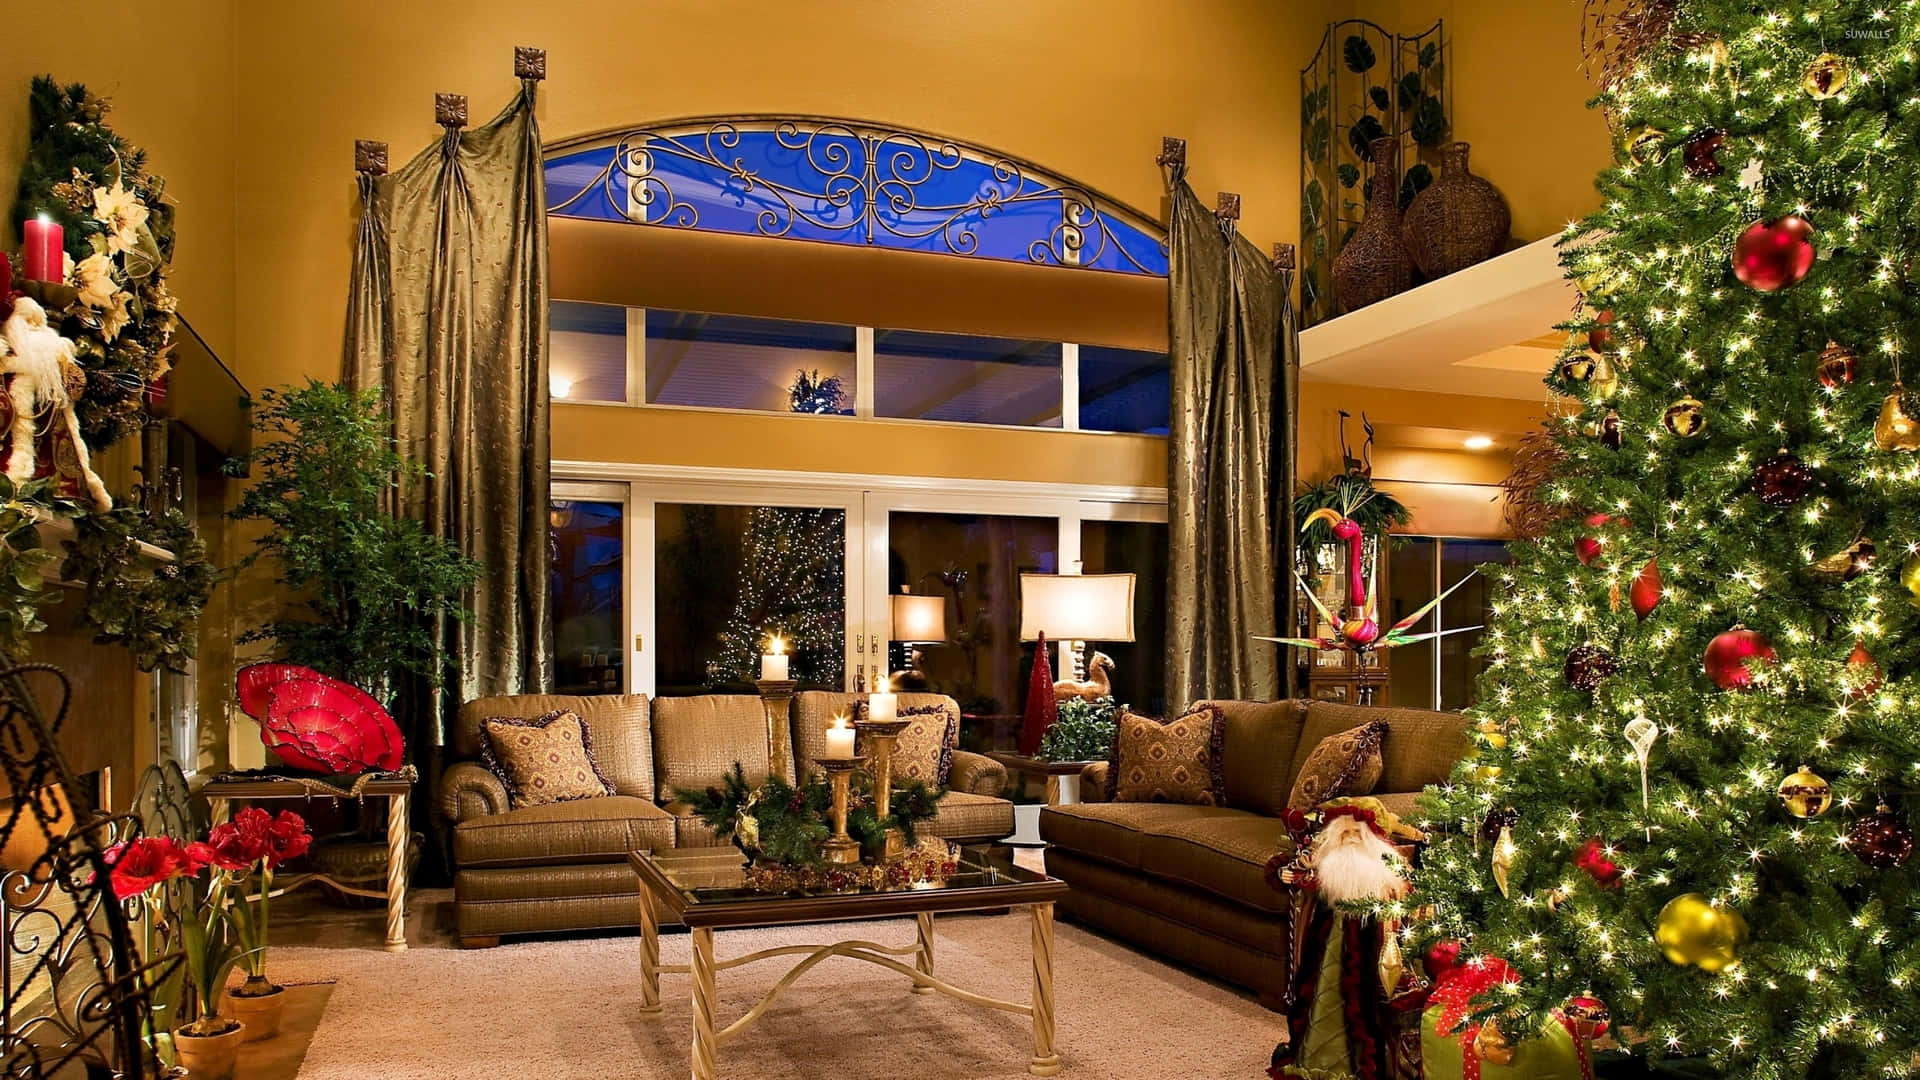 A cozy Christmas living room filled with decorations for the holiday season